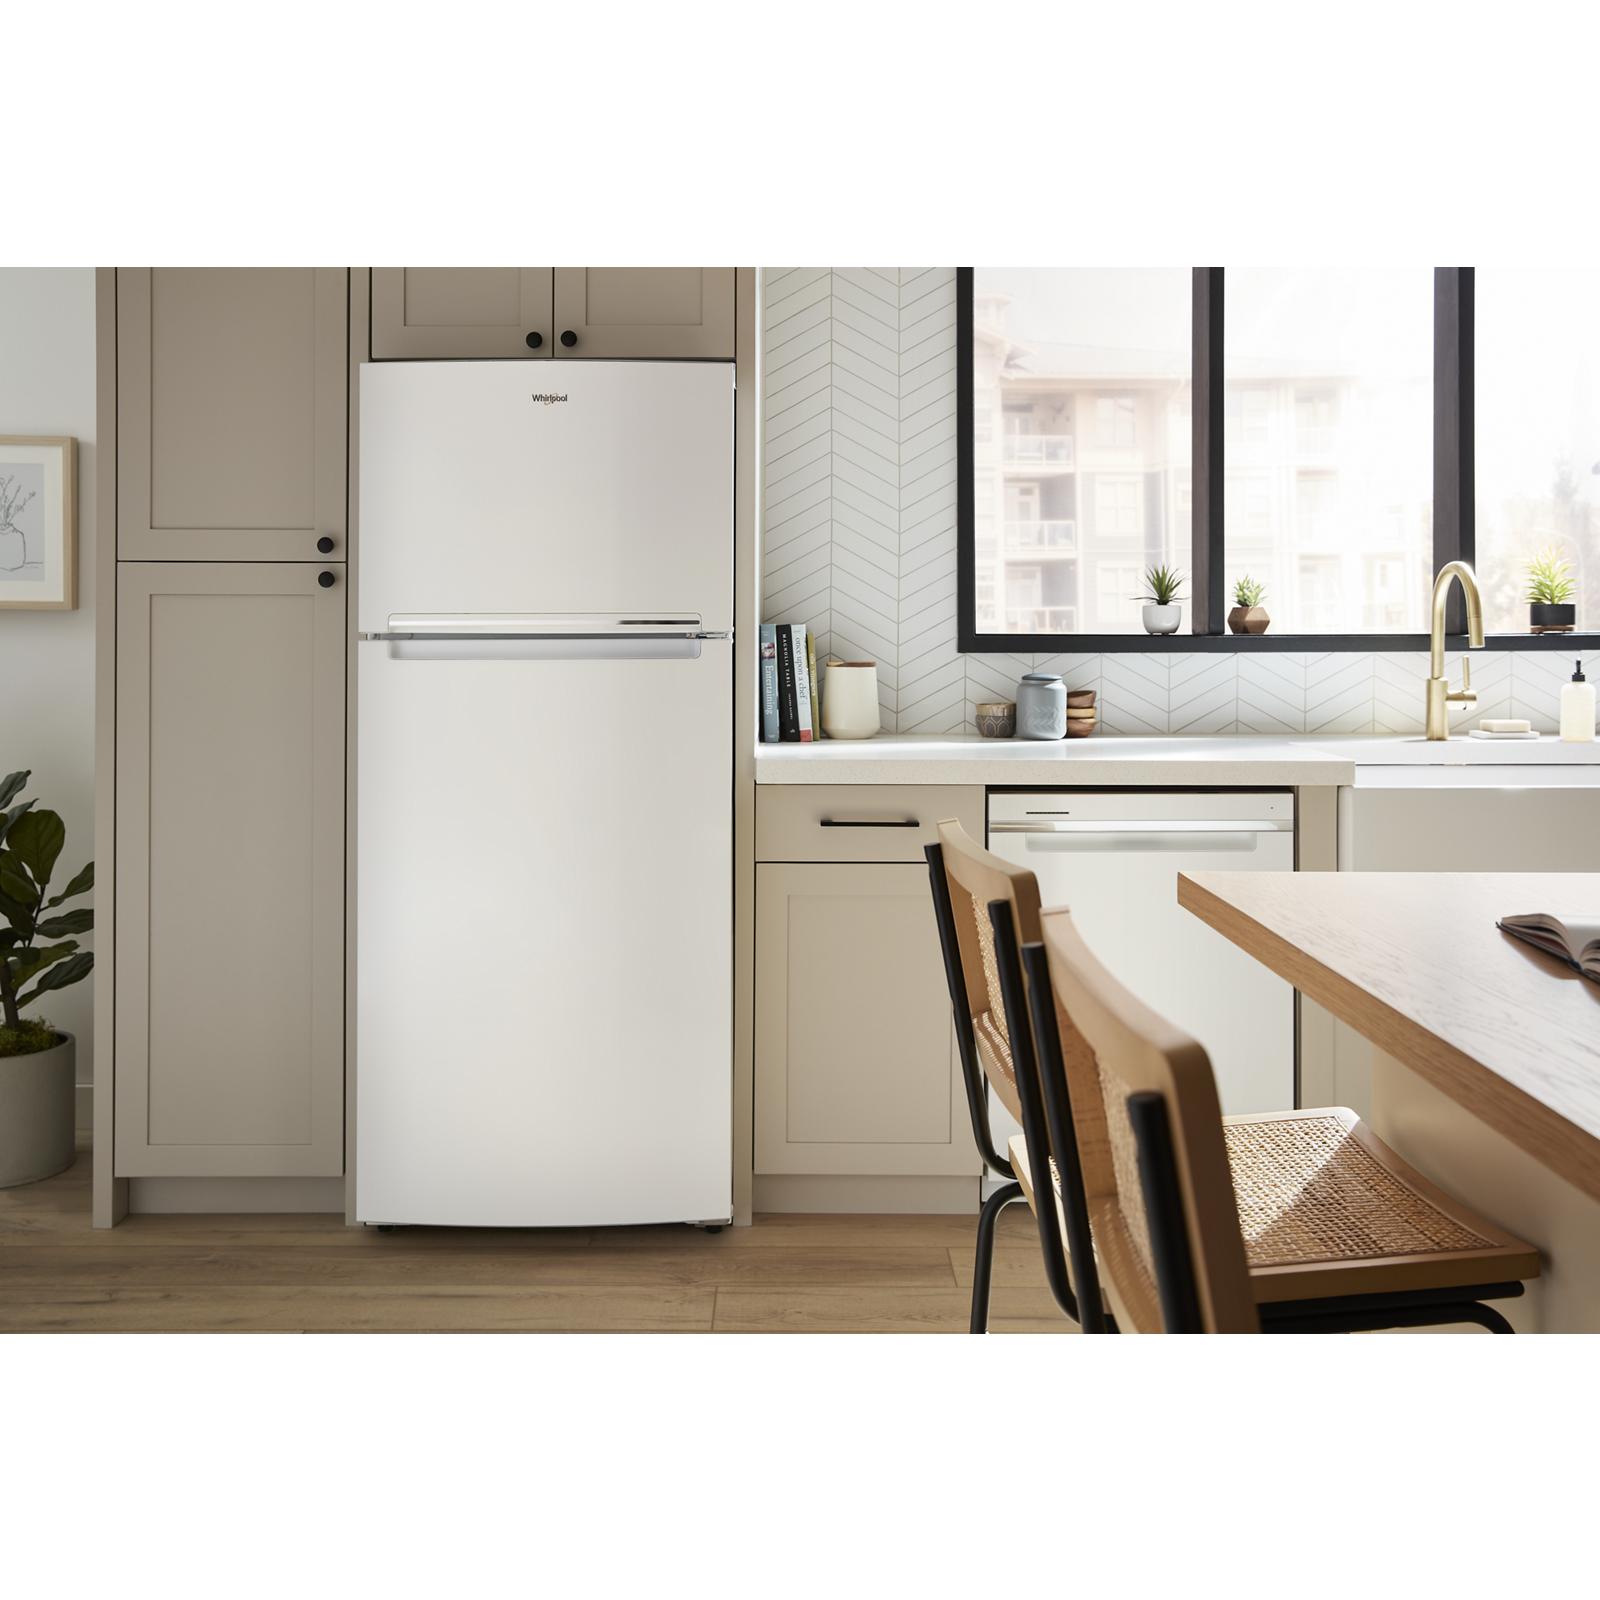 Whirlpool - 28.13 Inch 16.3 cu. ft Top Mount Refrigerator in White - WRTX5328PW